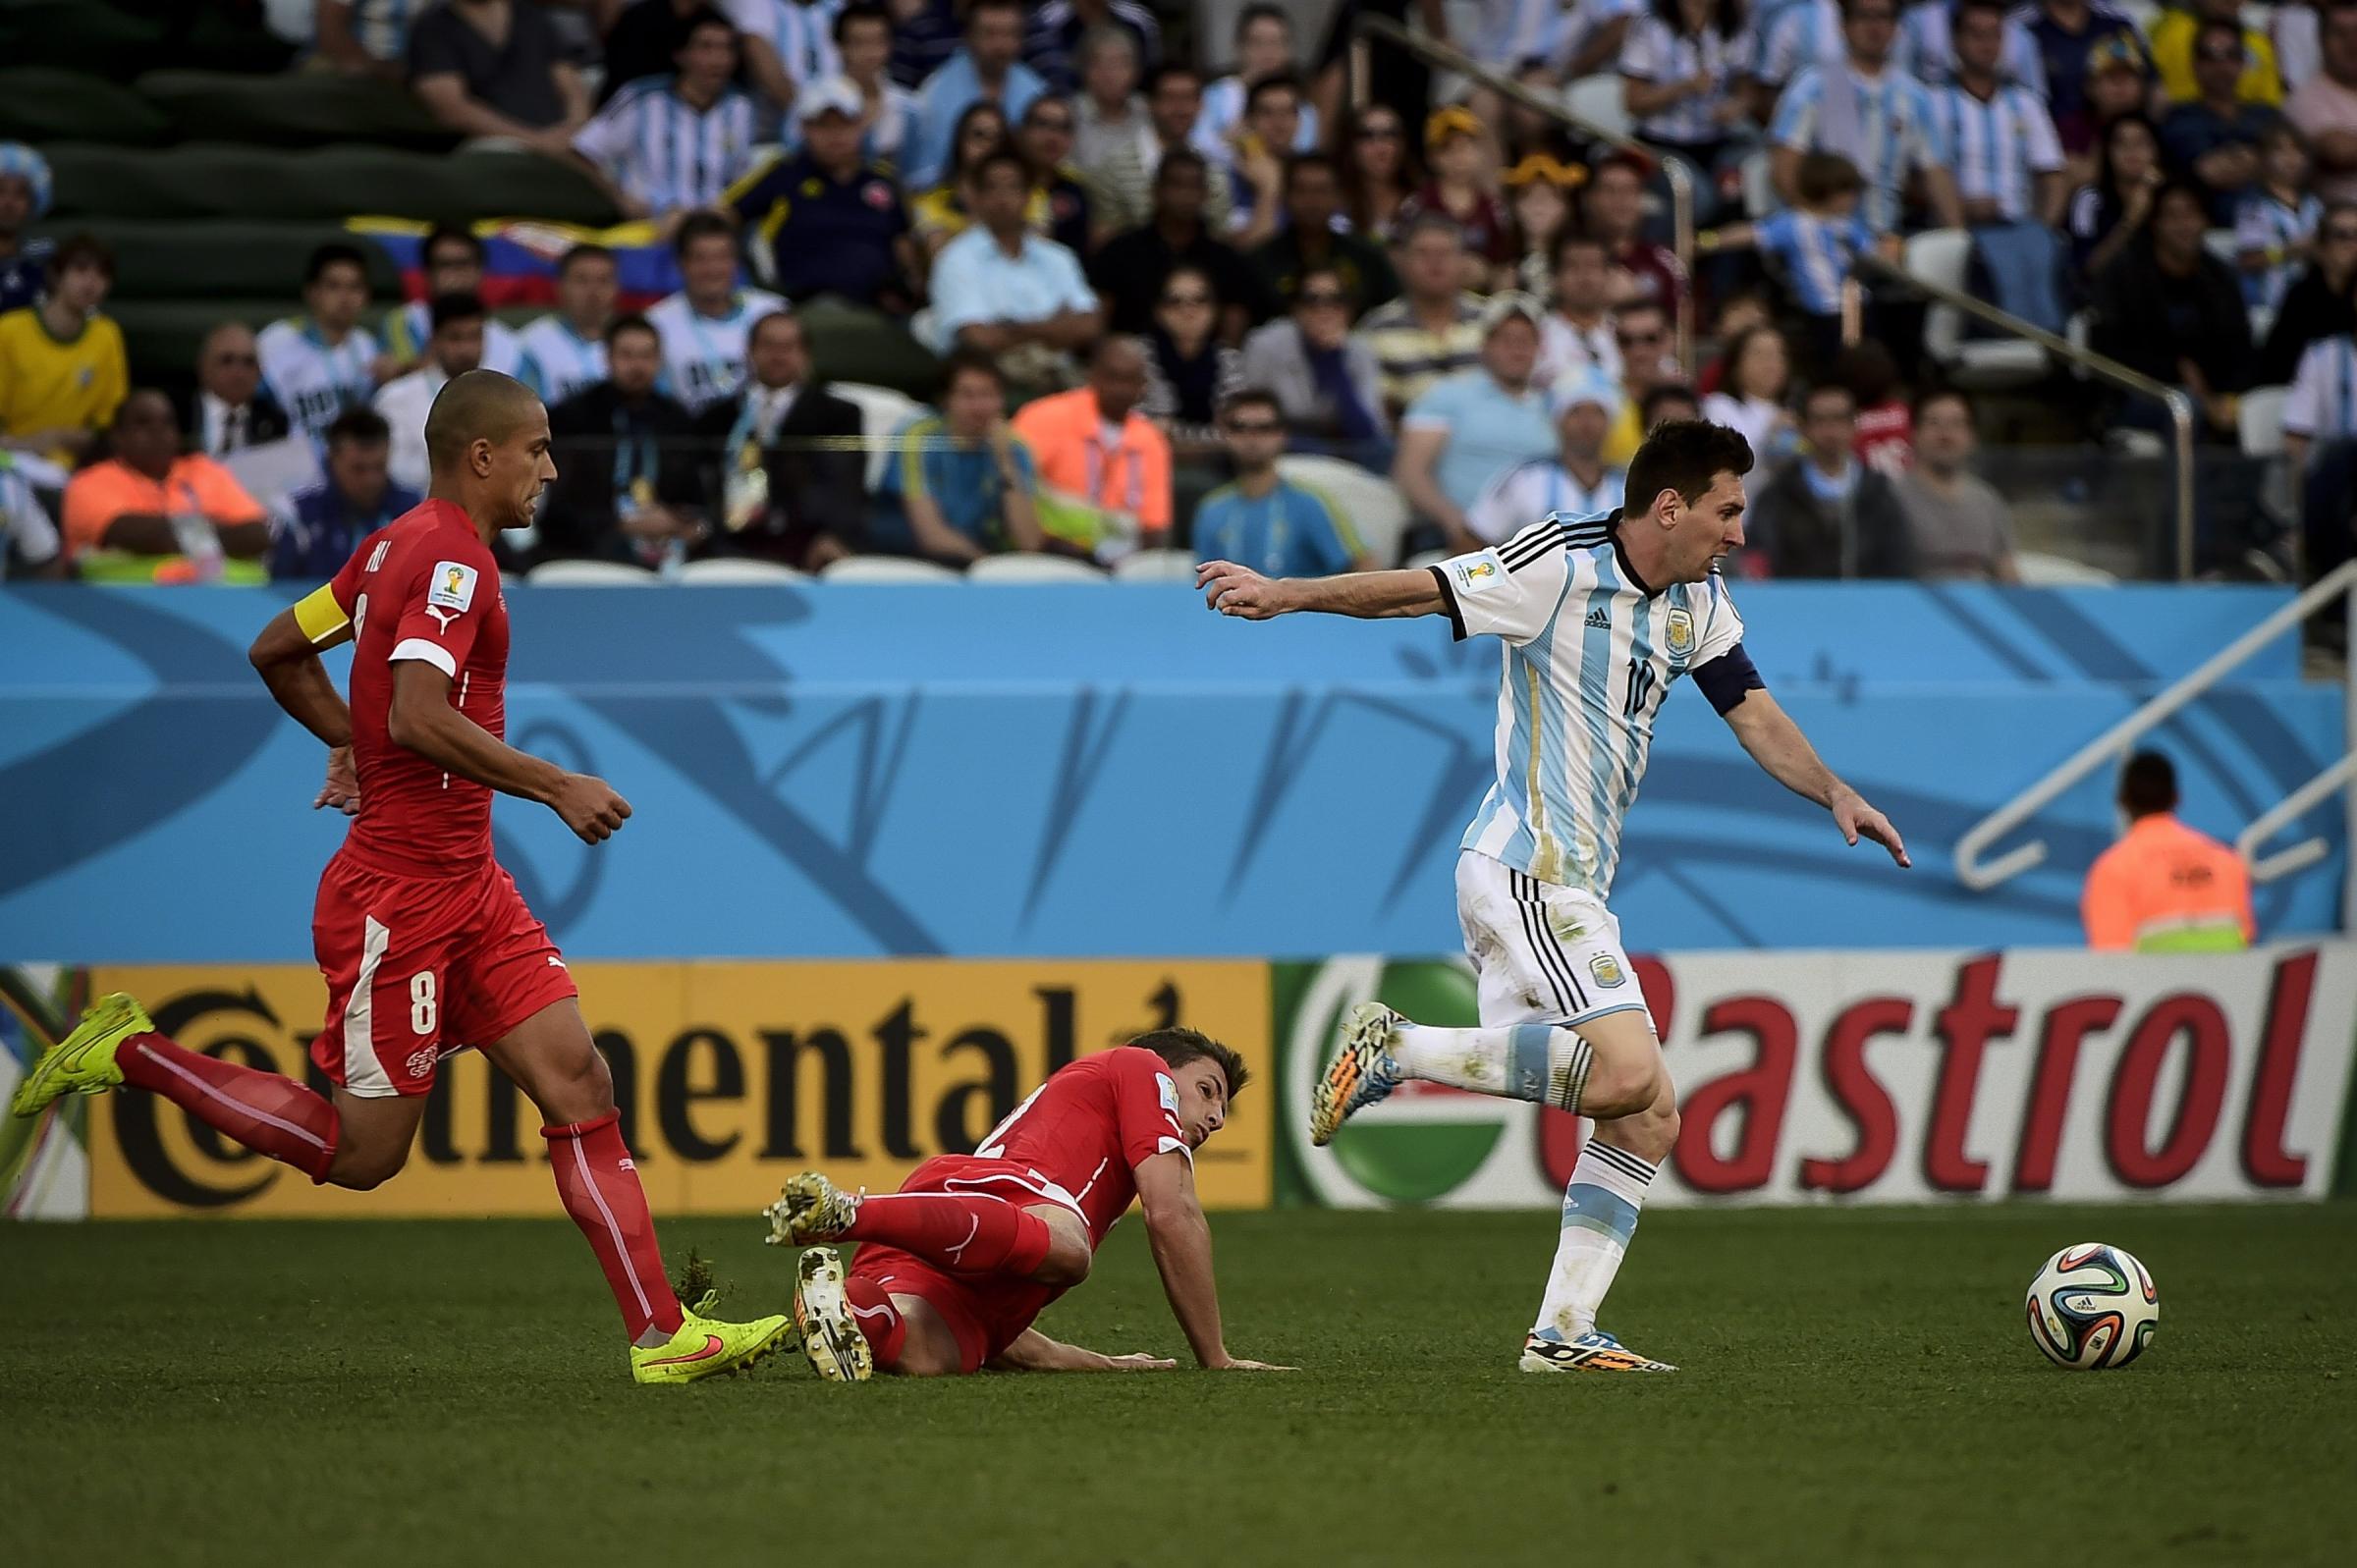 Lionel Messi (10) carries the ball through the midfiel during the Round of 16 of the 2014 World Cup, between Argentina and Switzerland, on July 1st, in Sao Paulo, Brazil.